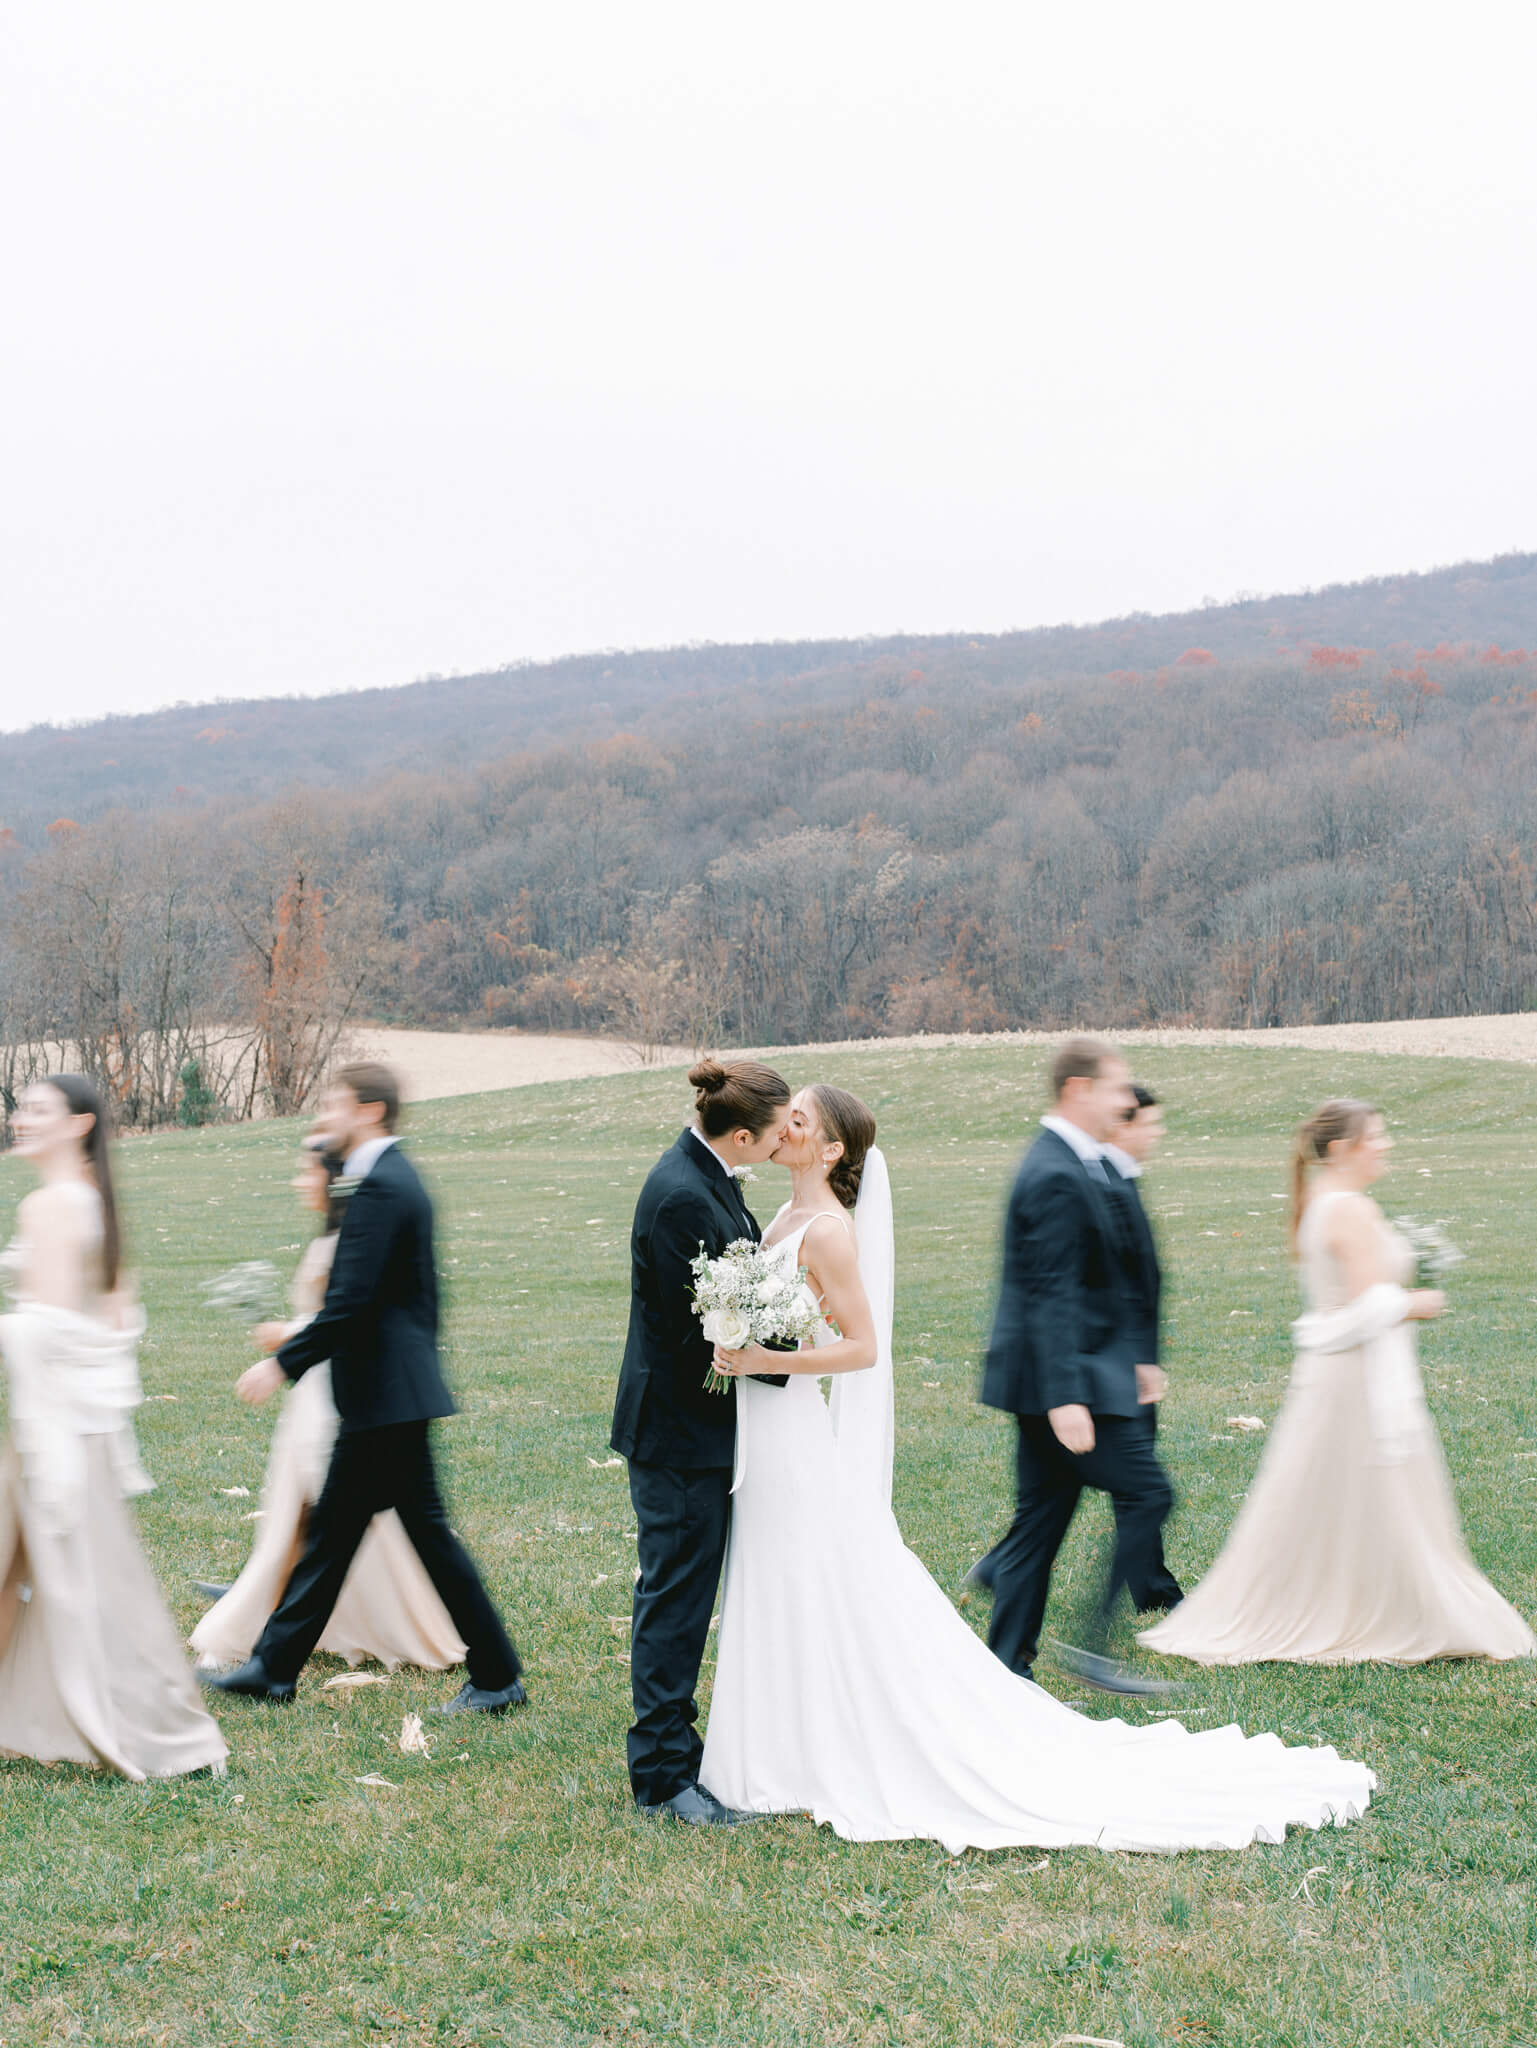 A bride and groom paused in time and kissing in front of a mountainous backdrop while their wedding party walks around them.